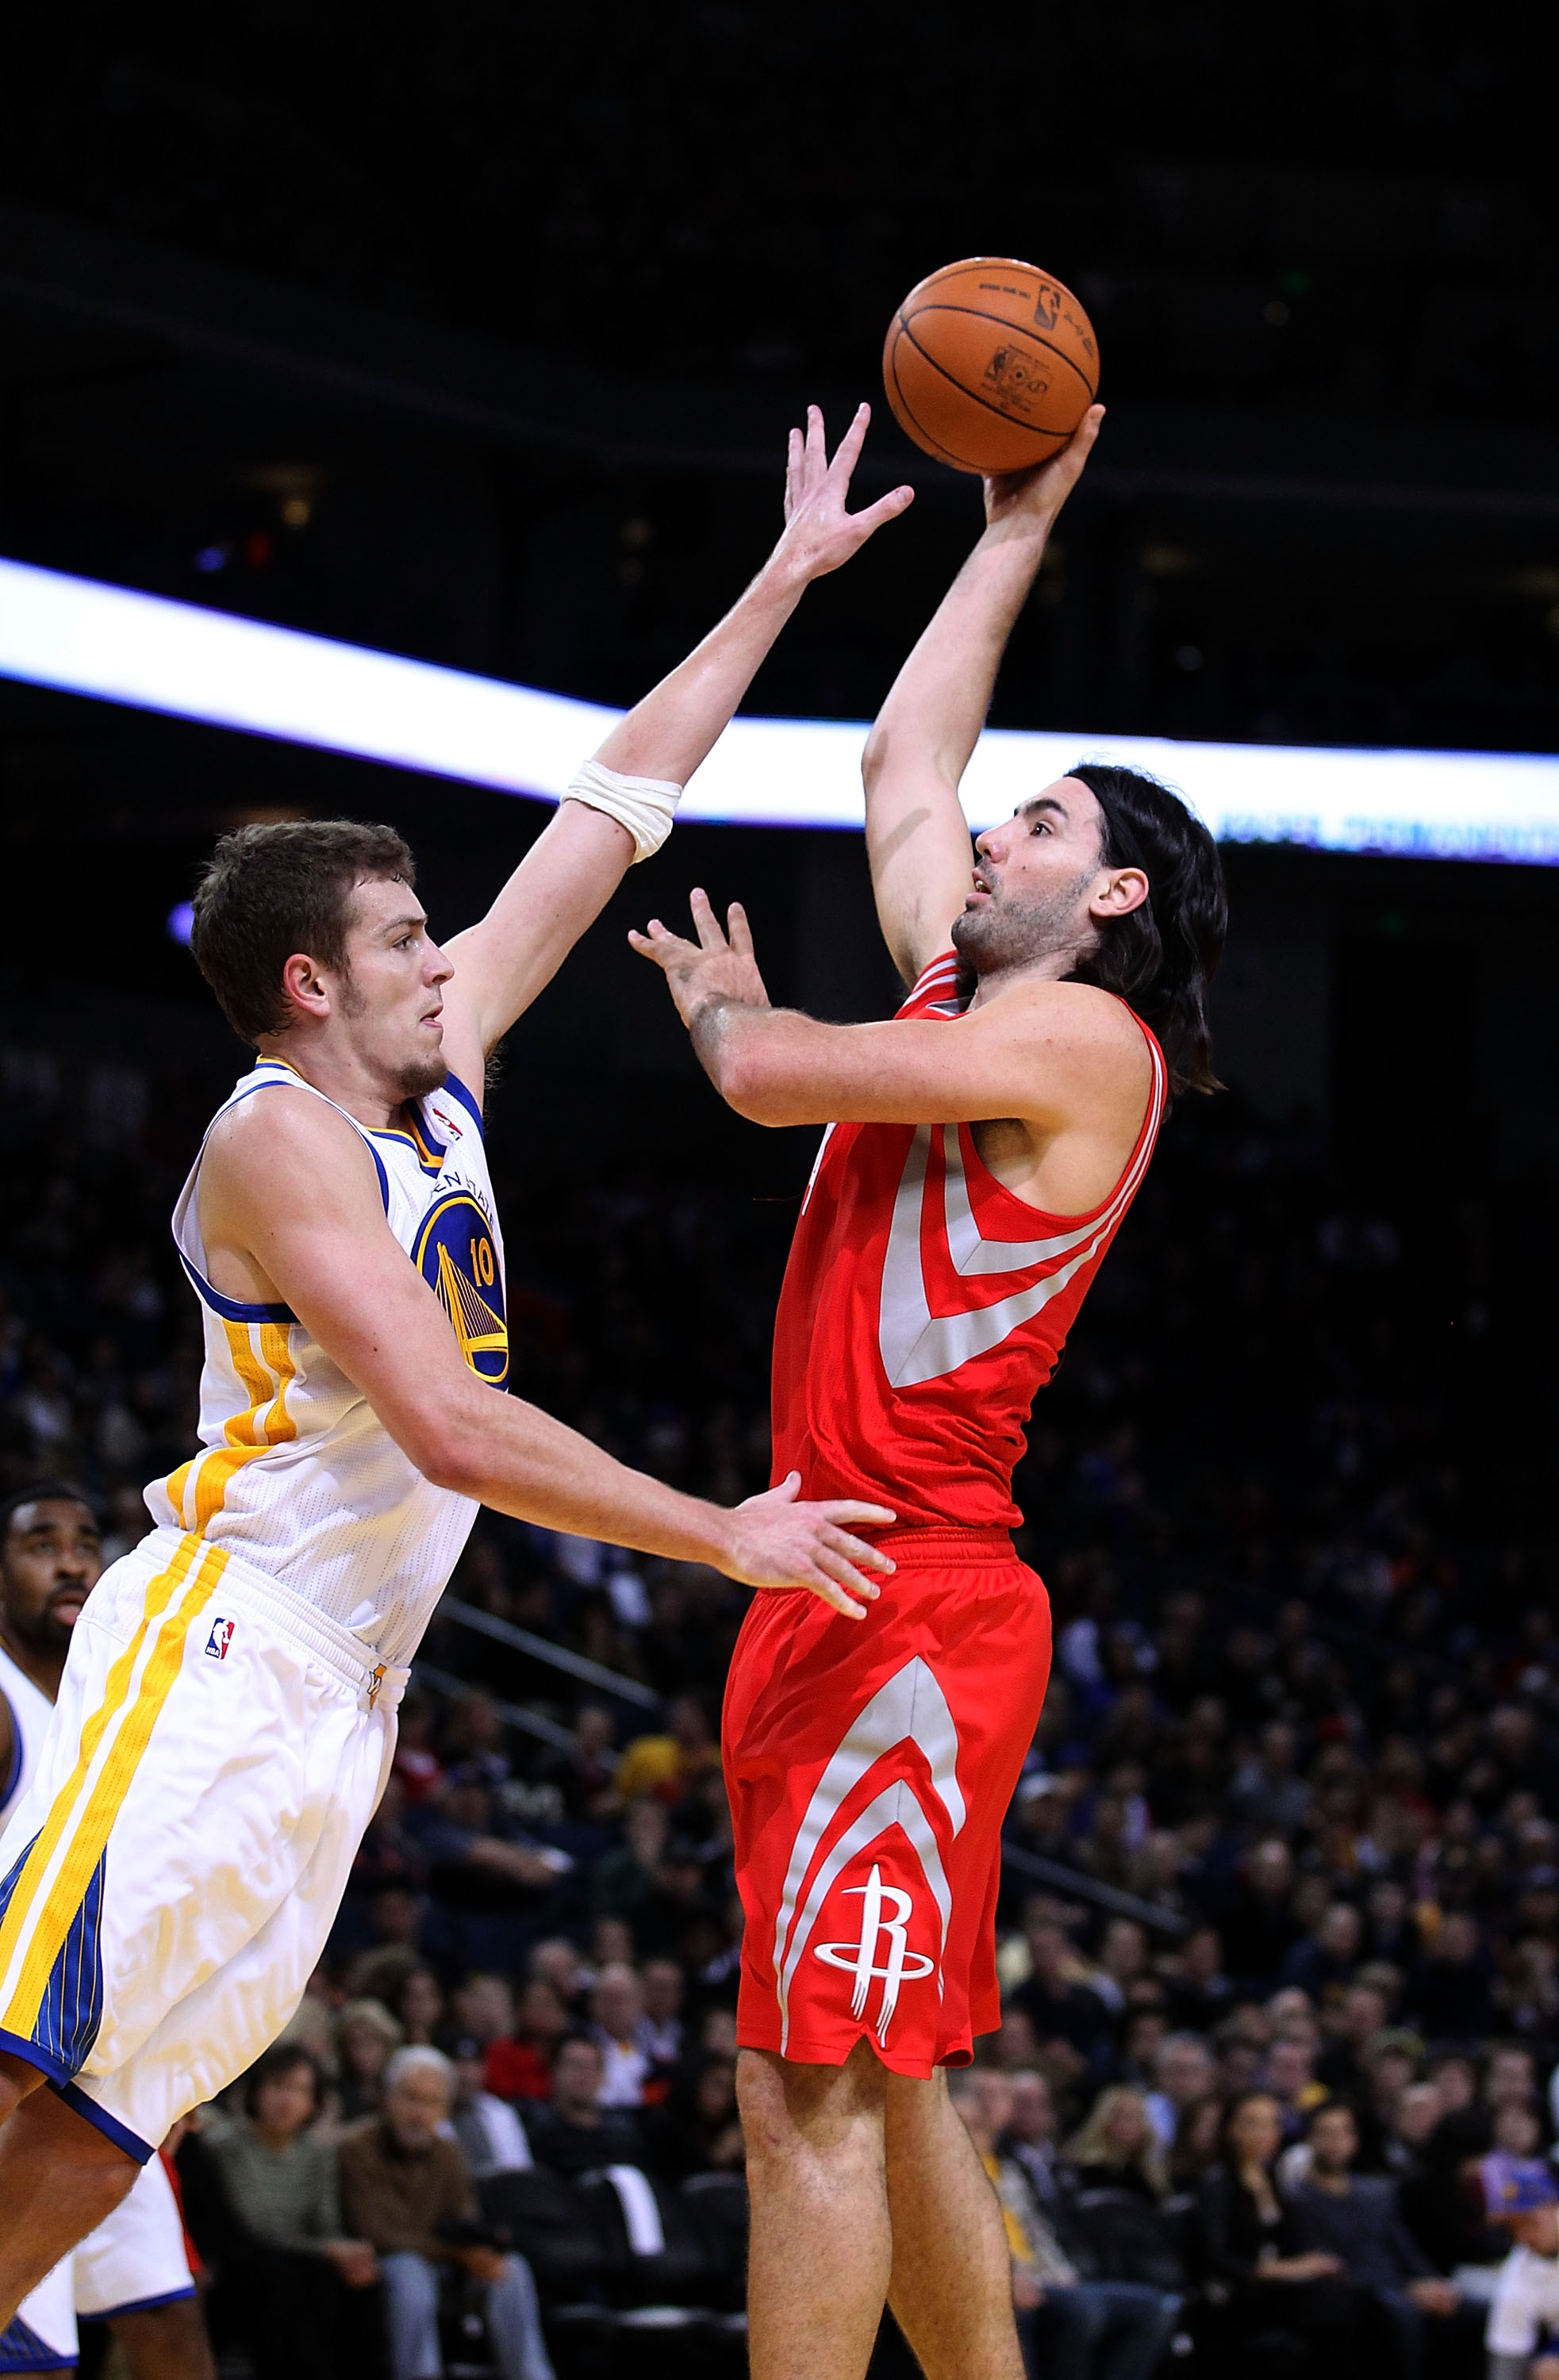 OAKLAND, CA - DECEMBER 20:  Luis Scola #4 of the Houston Rockets shoots over David Lee #10 of the Golden State Warriors at Oracle Arena on December 20, 2010 in Oakland, California. NOTE TO USER: User expressly acknowledges and agrees that, by downloading